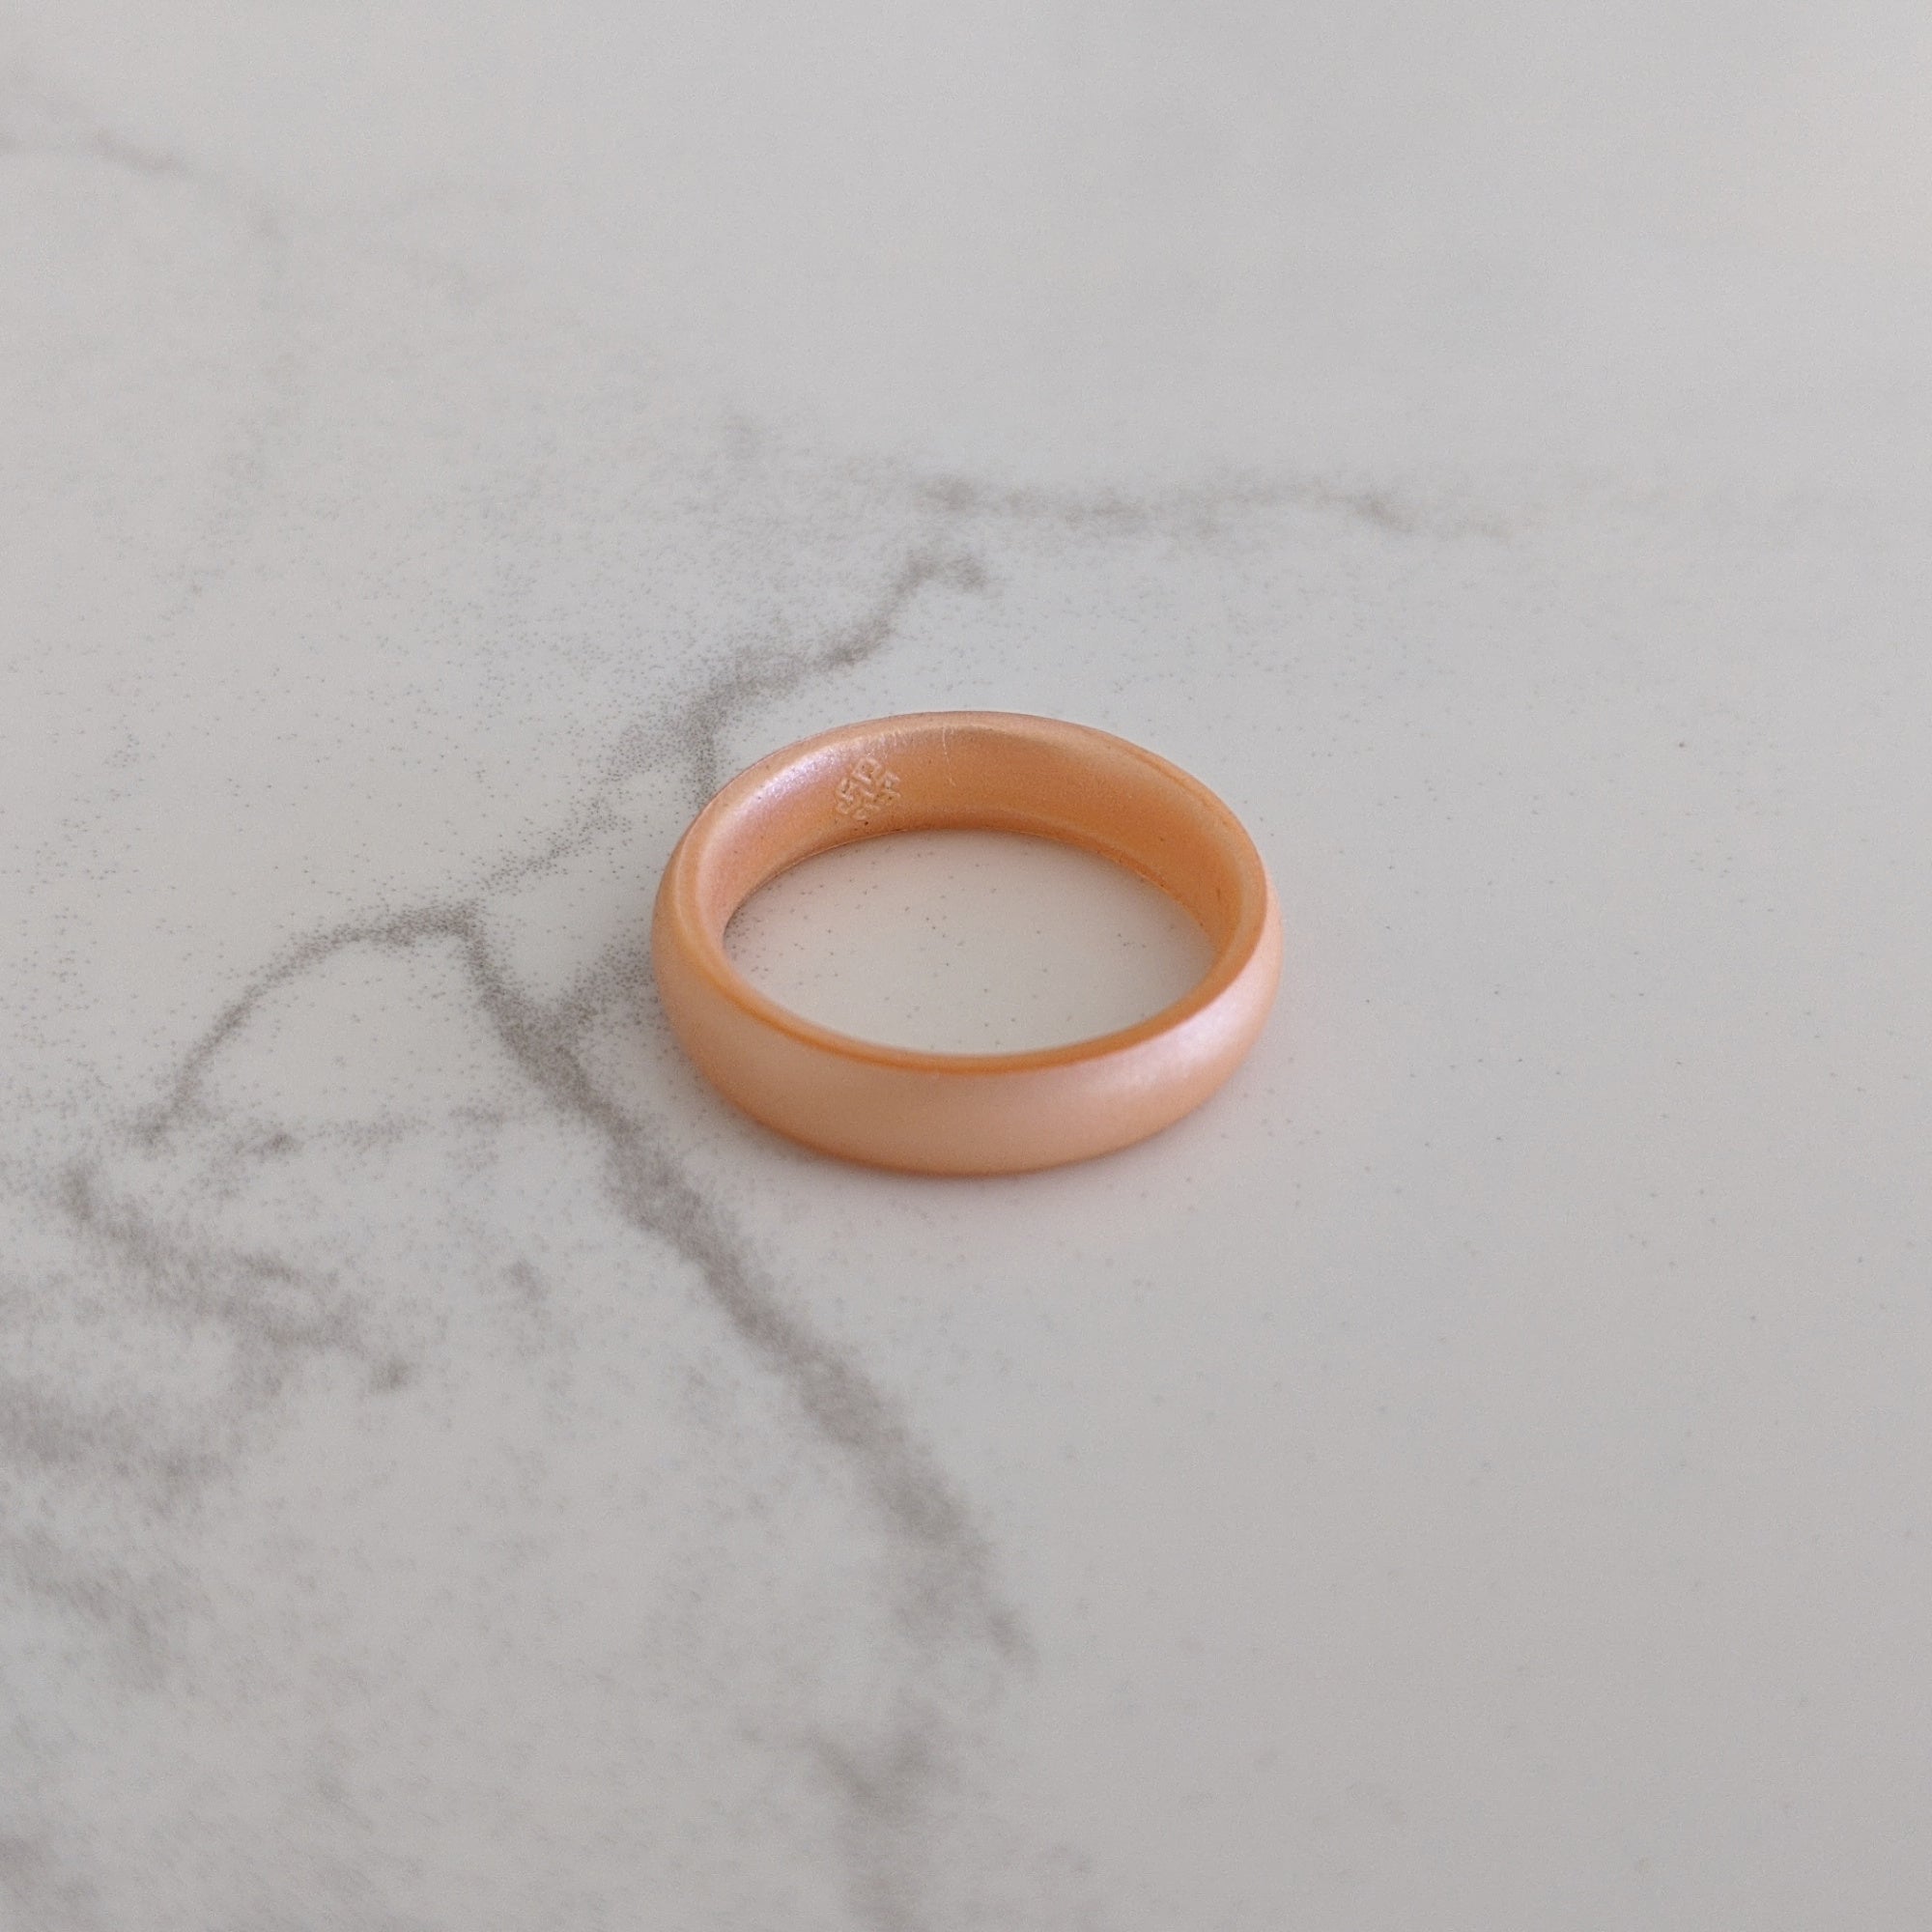 Pearl Baby Orange Breathable Silicone Ring for Women - Knot Theory